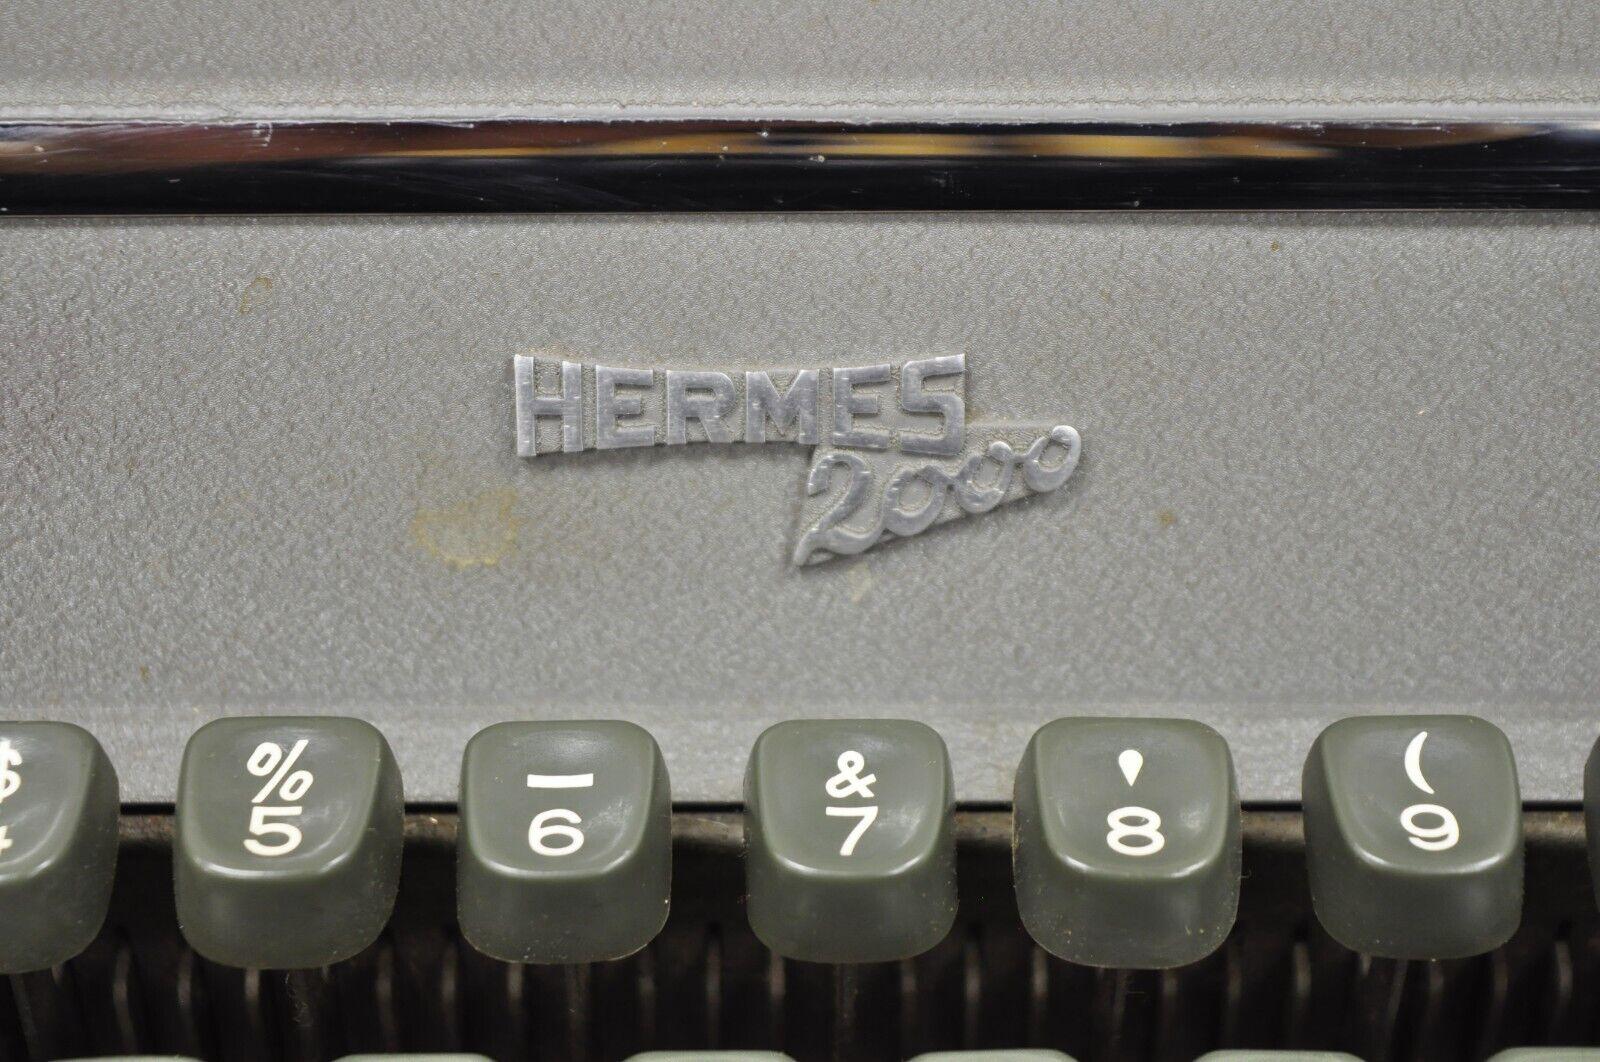 Mid-20th Century Vintage Hermes 2000 by Paillard Manual Typewriter with Green Carrying Case